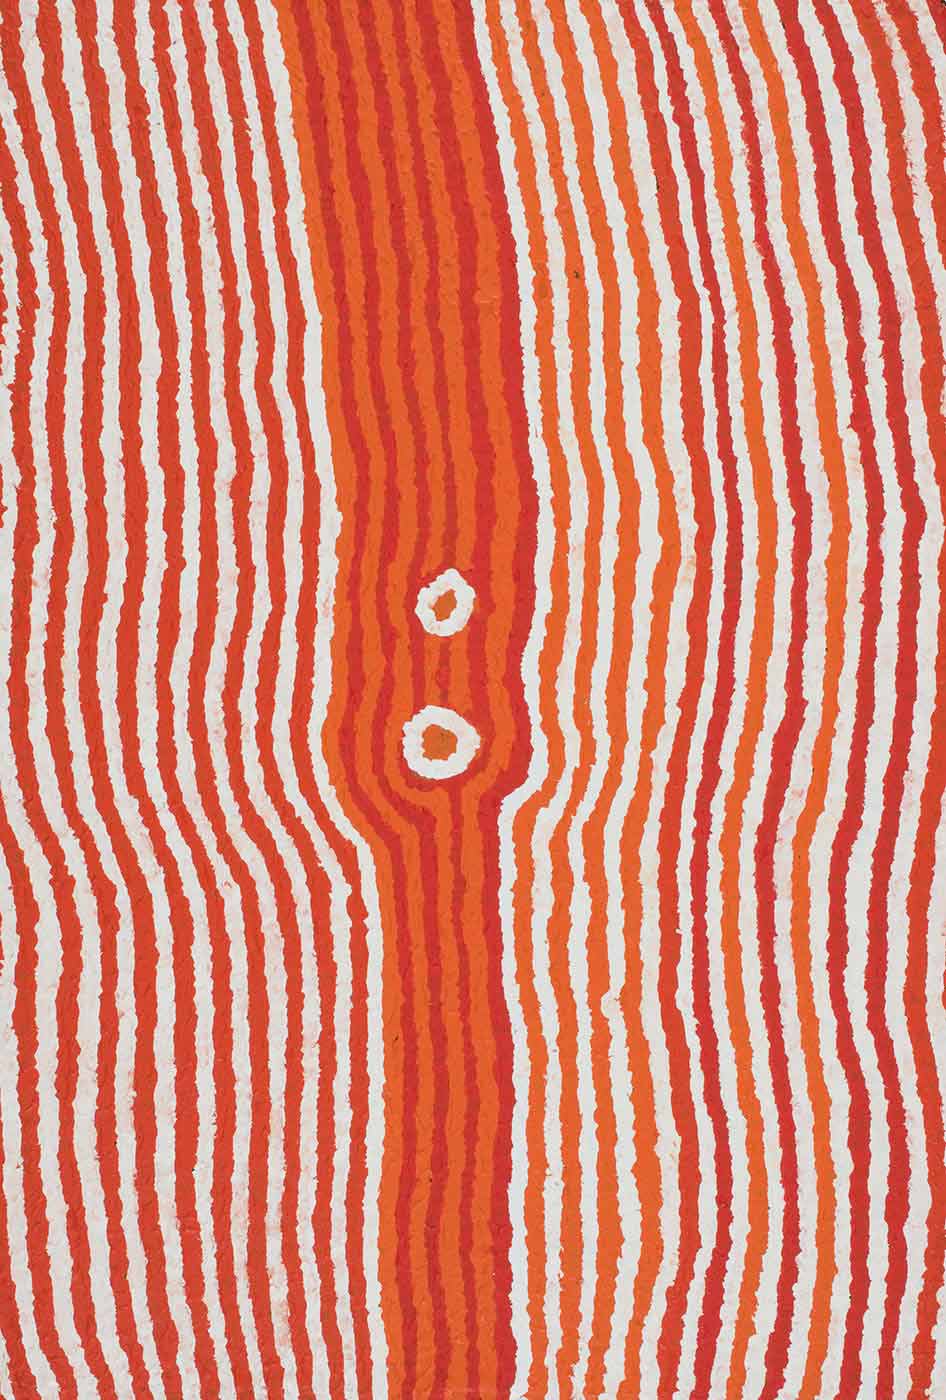 A painting on brown linen with orange, red and white vertical stripes with a darker central section. In the centre there are two white and orange circles. - click to view larger image